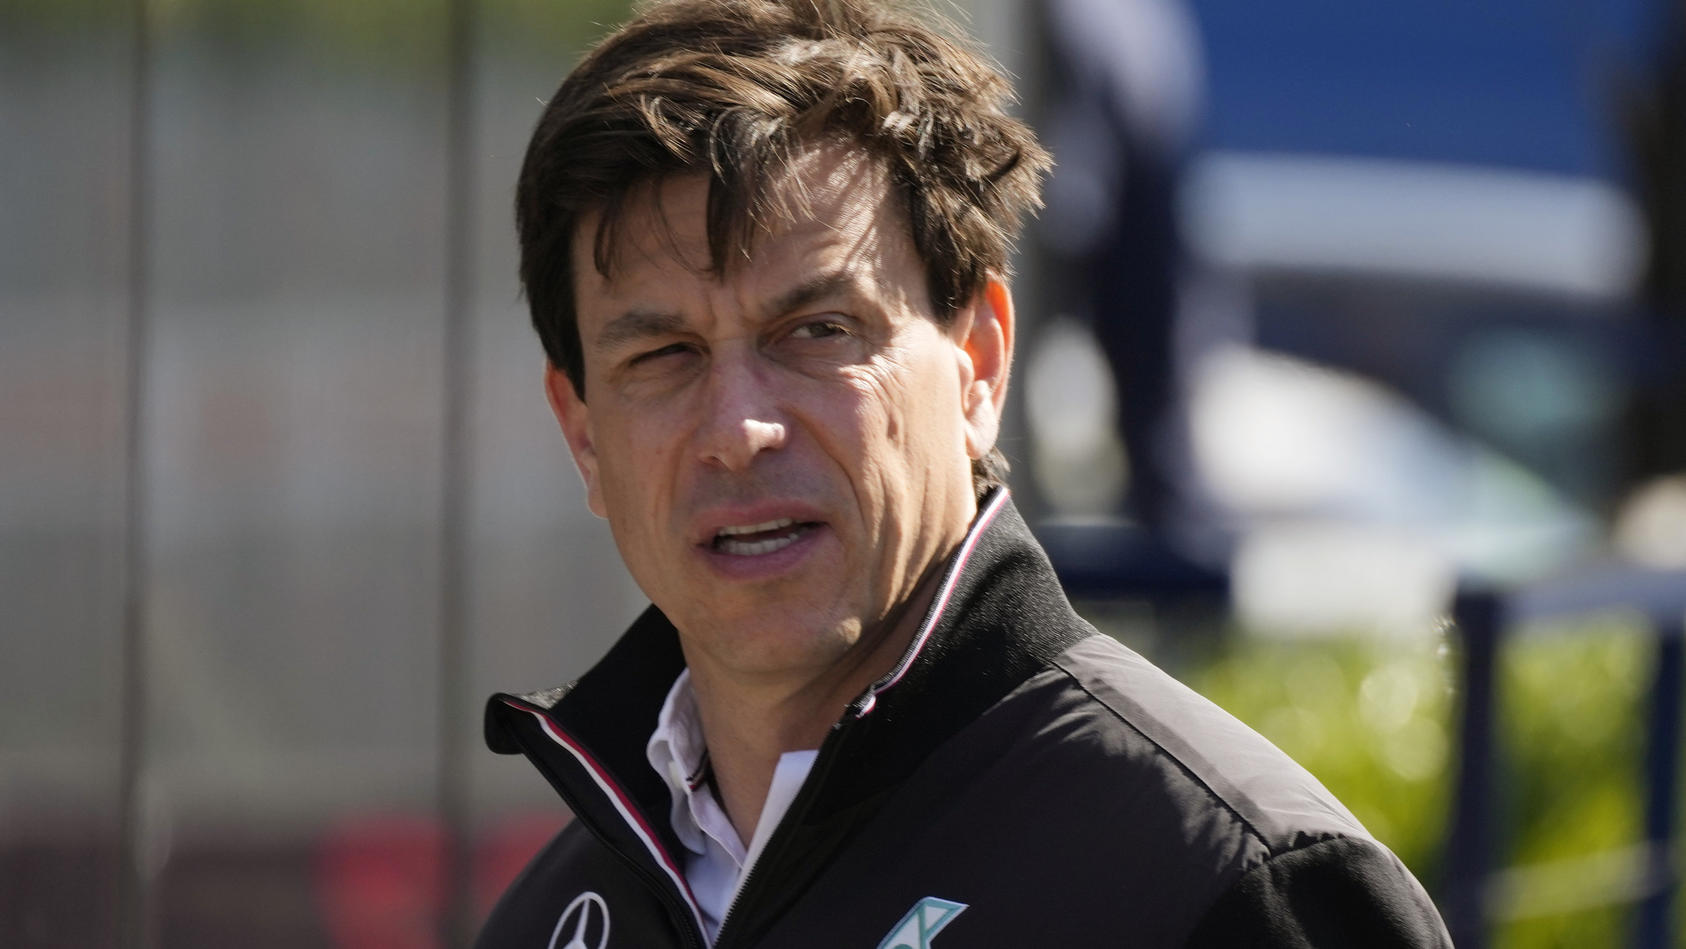 Team chief of Mercedes-AMG Petronas Toto Wolff arrives in the paddock ahead the Emilia Romagna Formula One Grand Prix, at the Enzo and Dino Ferrari racetrack, in Imola, Italy, Sunday, April 24, 2022. (AP Photo/Luca Bruno)